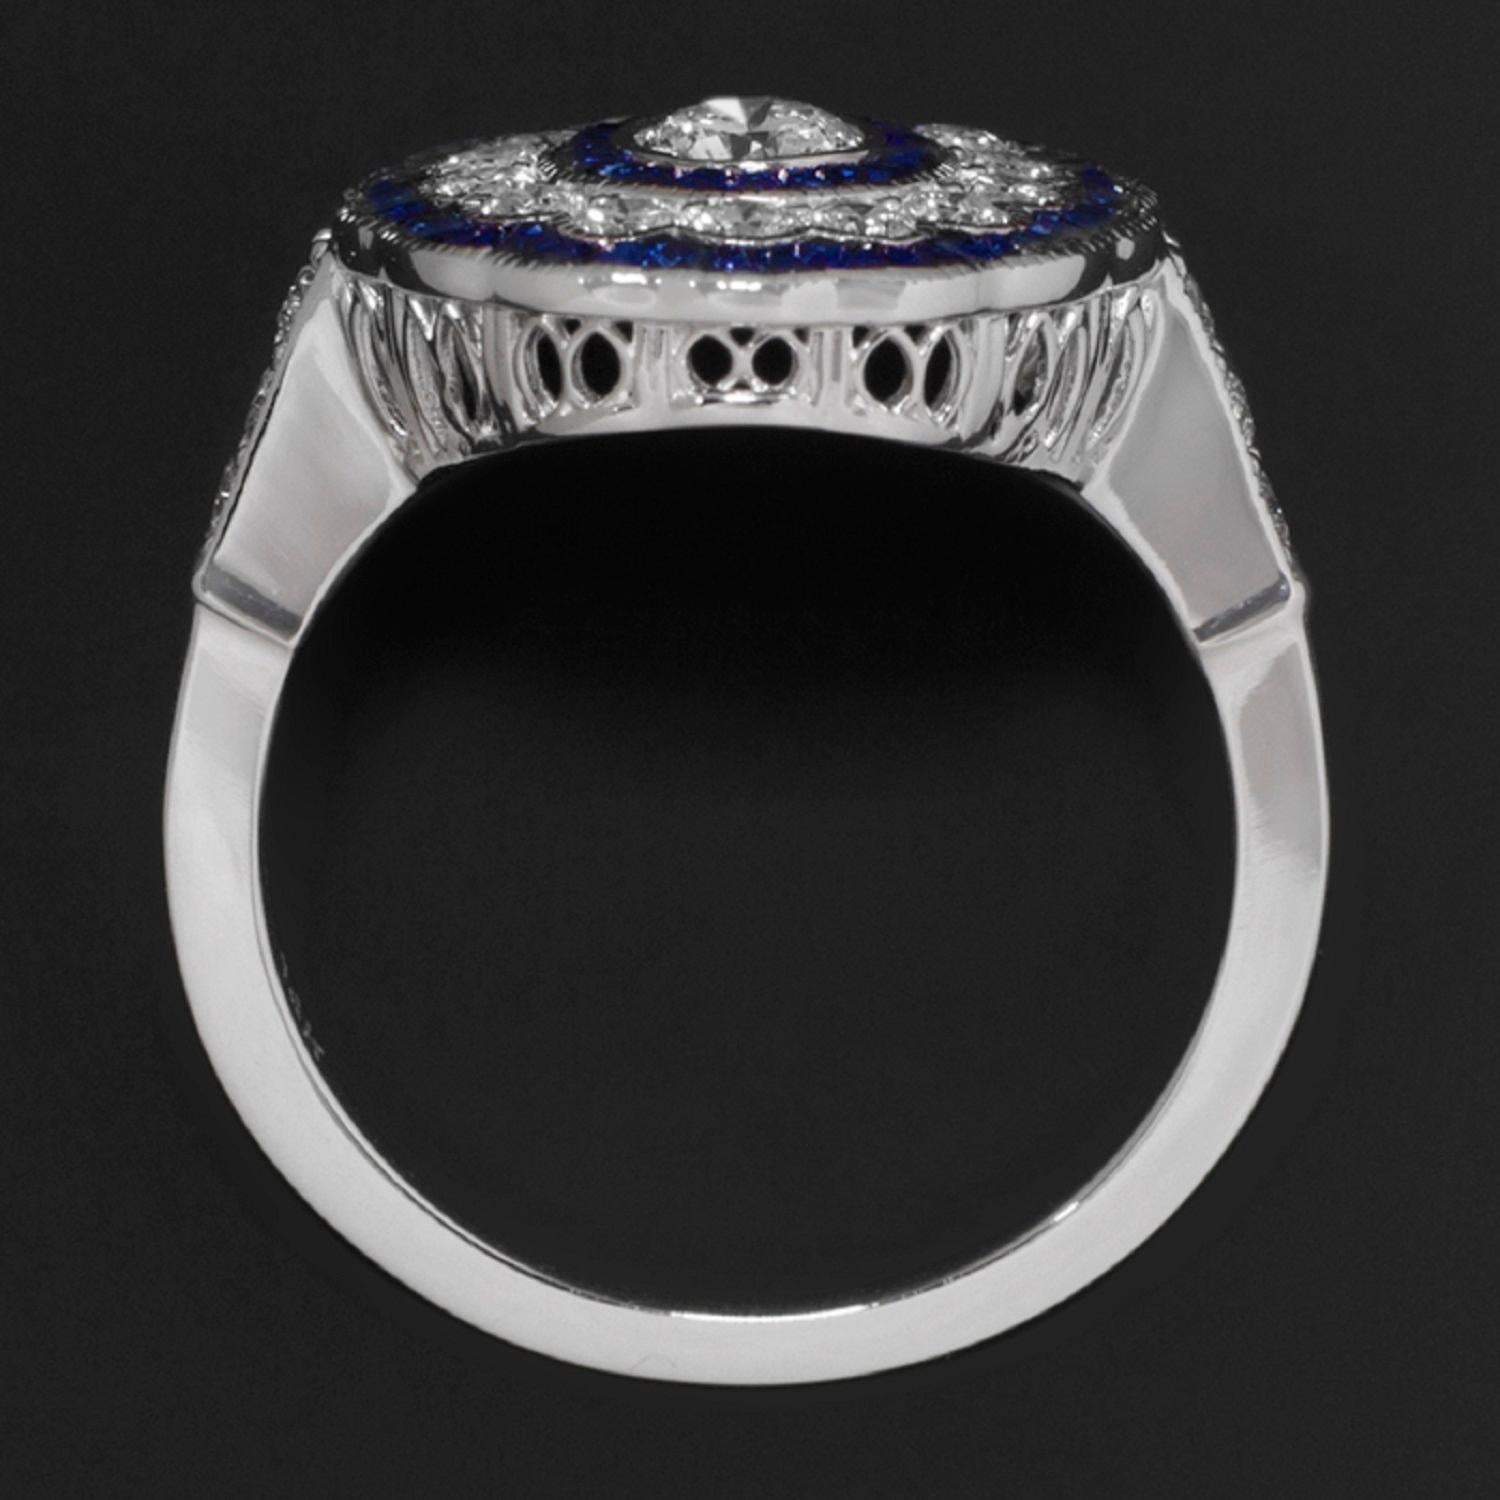 Art Deco Style ring features a very high quality round brilliant cut diamond surrounded by a glamorous triple halo of vibrant diamonds and royal blue natural sapphires. The ¼ carat F VS2 diamond is phenomenal in quality, bright white, and